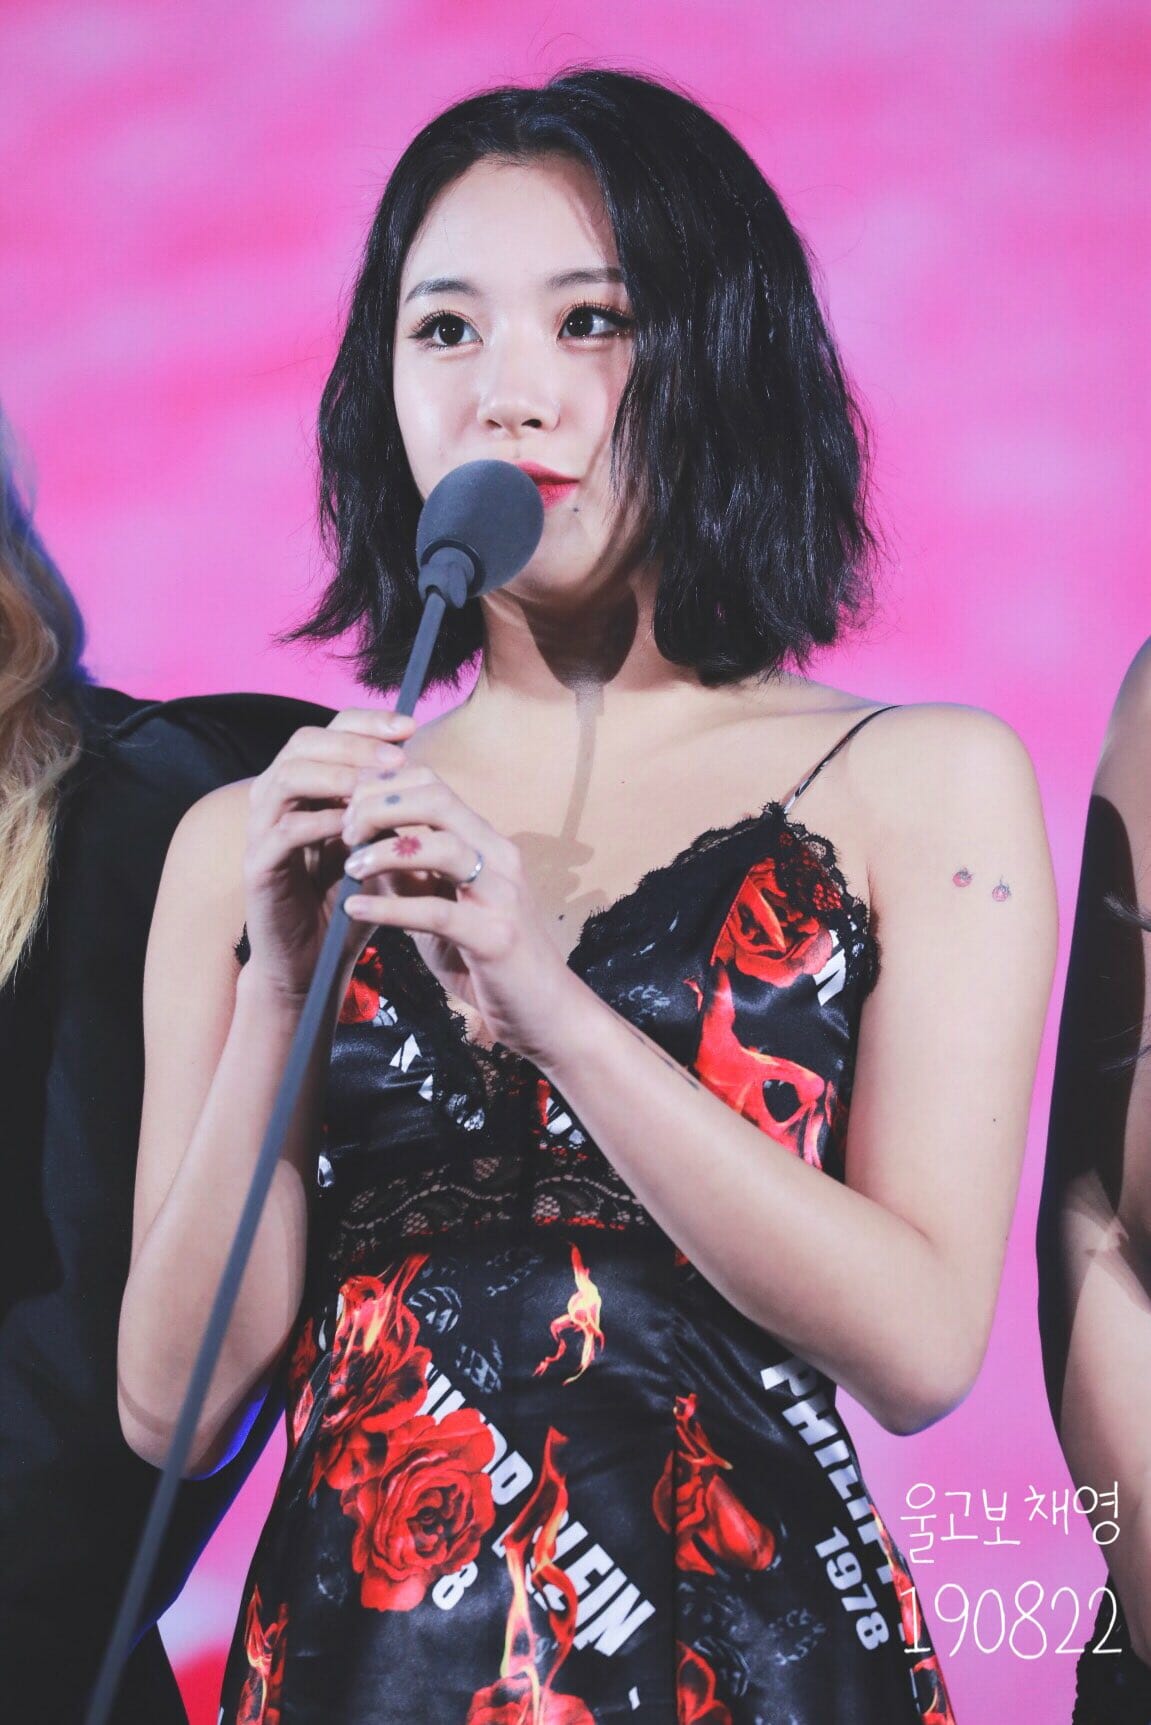 Why does Chaeyoung have a tattoo?